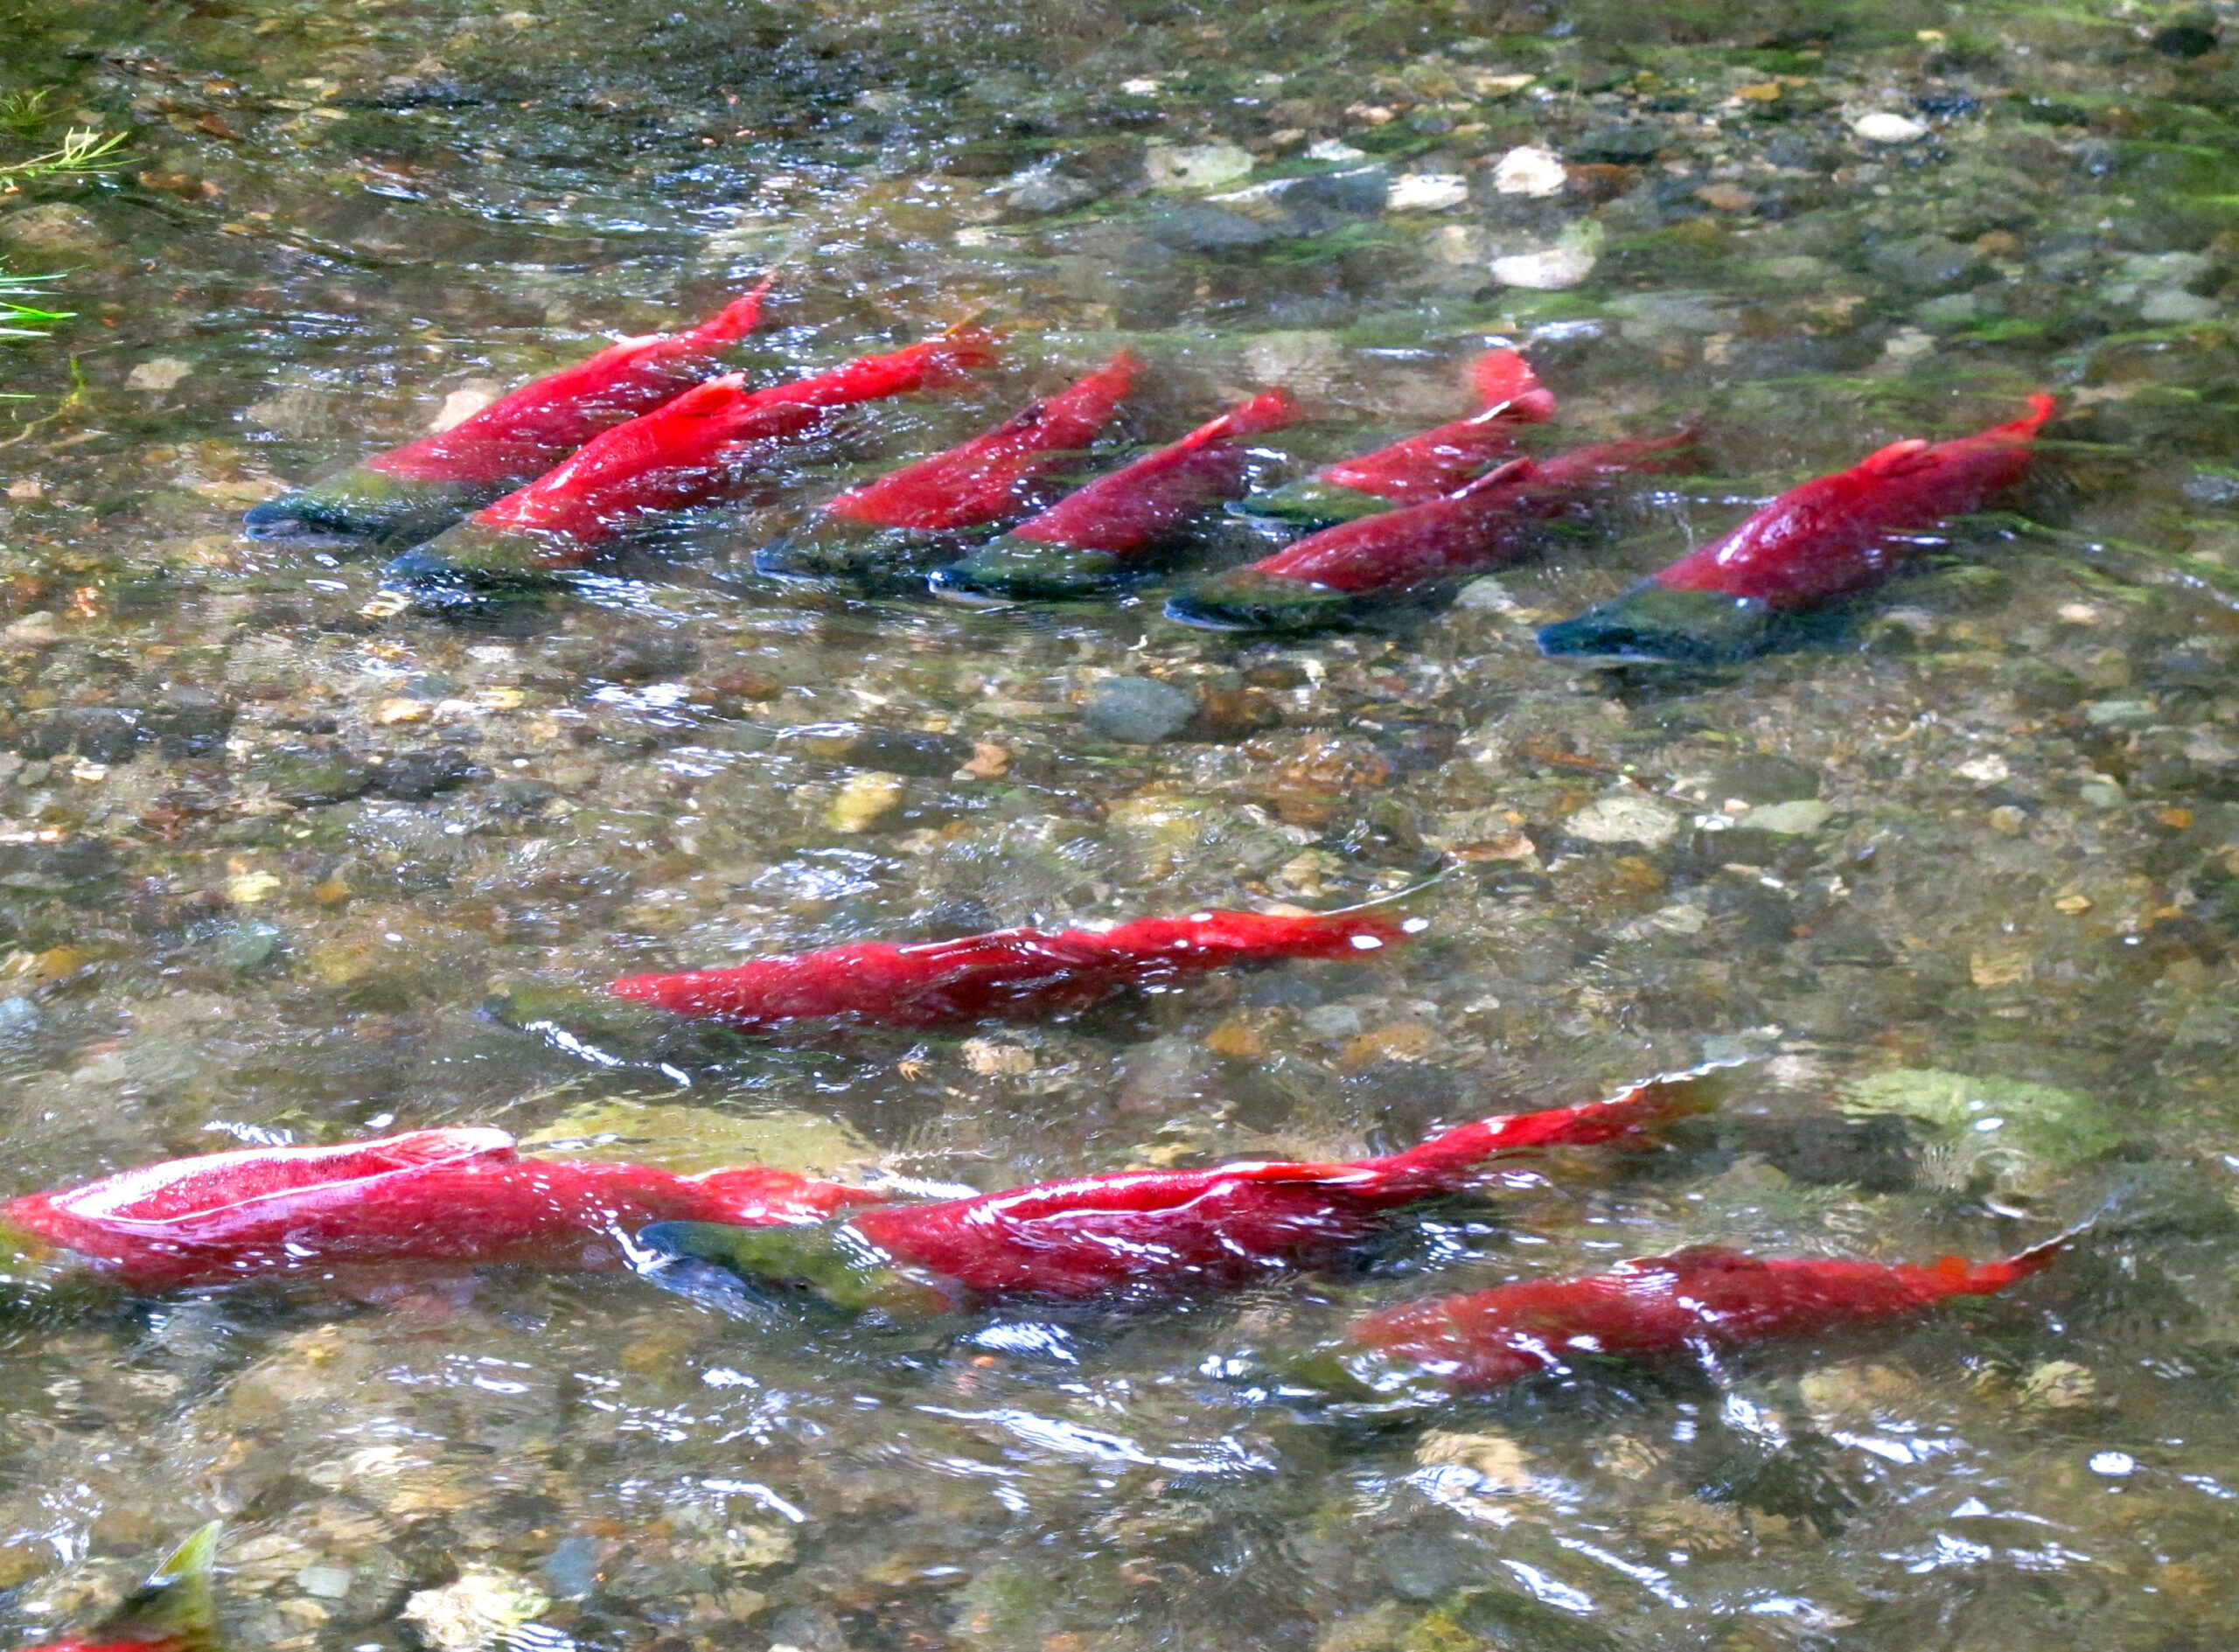 Every year, millions of sockeye return to the headwaters of Bristol Bay, the proposed site of an open-pit gold and copper mine known as the Pebble Mine